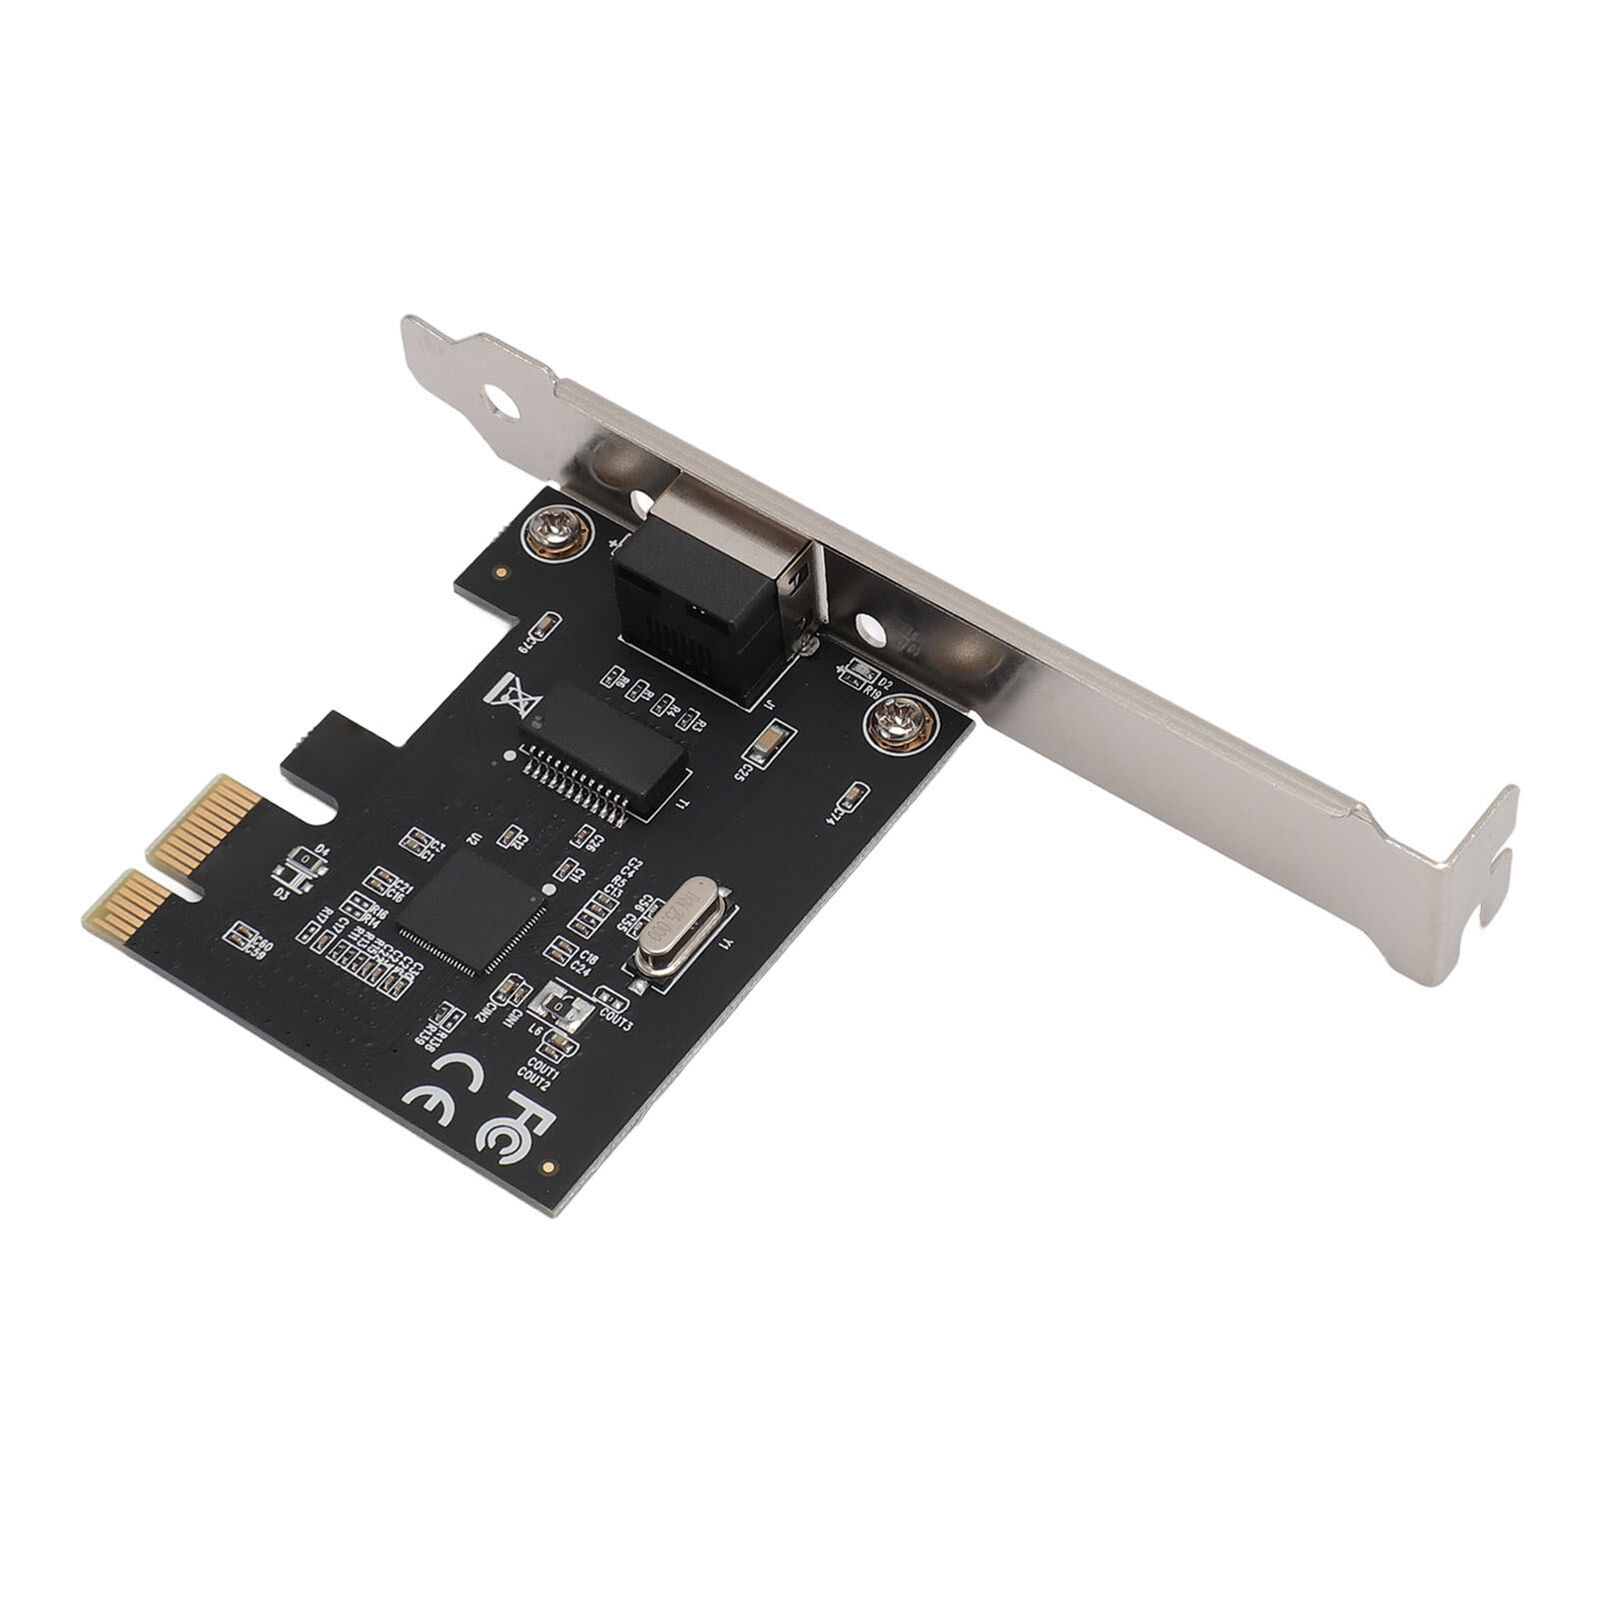 PCI Express Gigabit Ethernet Card Professional 10 100 1000Mbps Plug and Play GSY